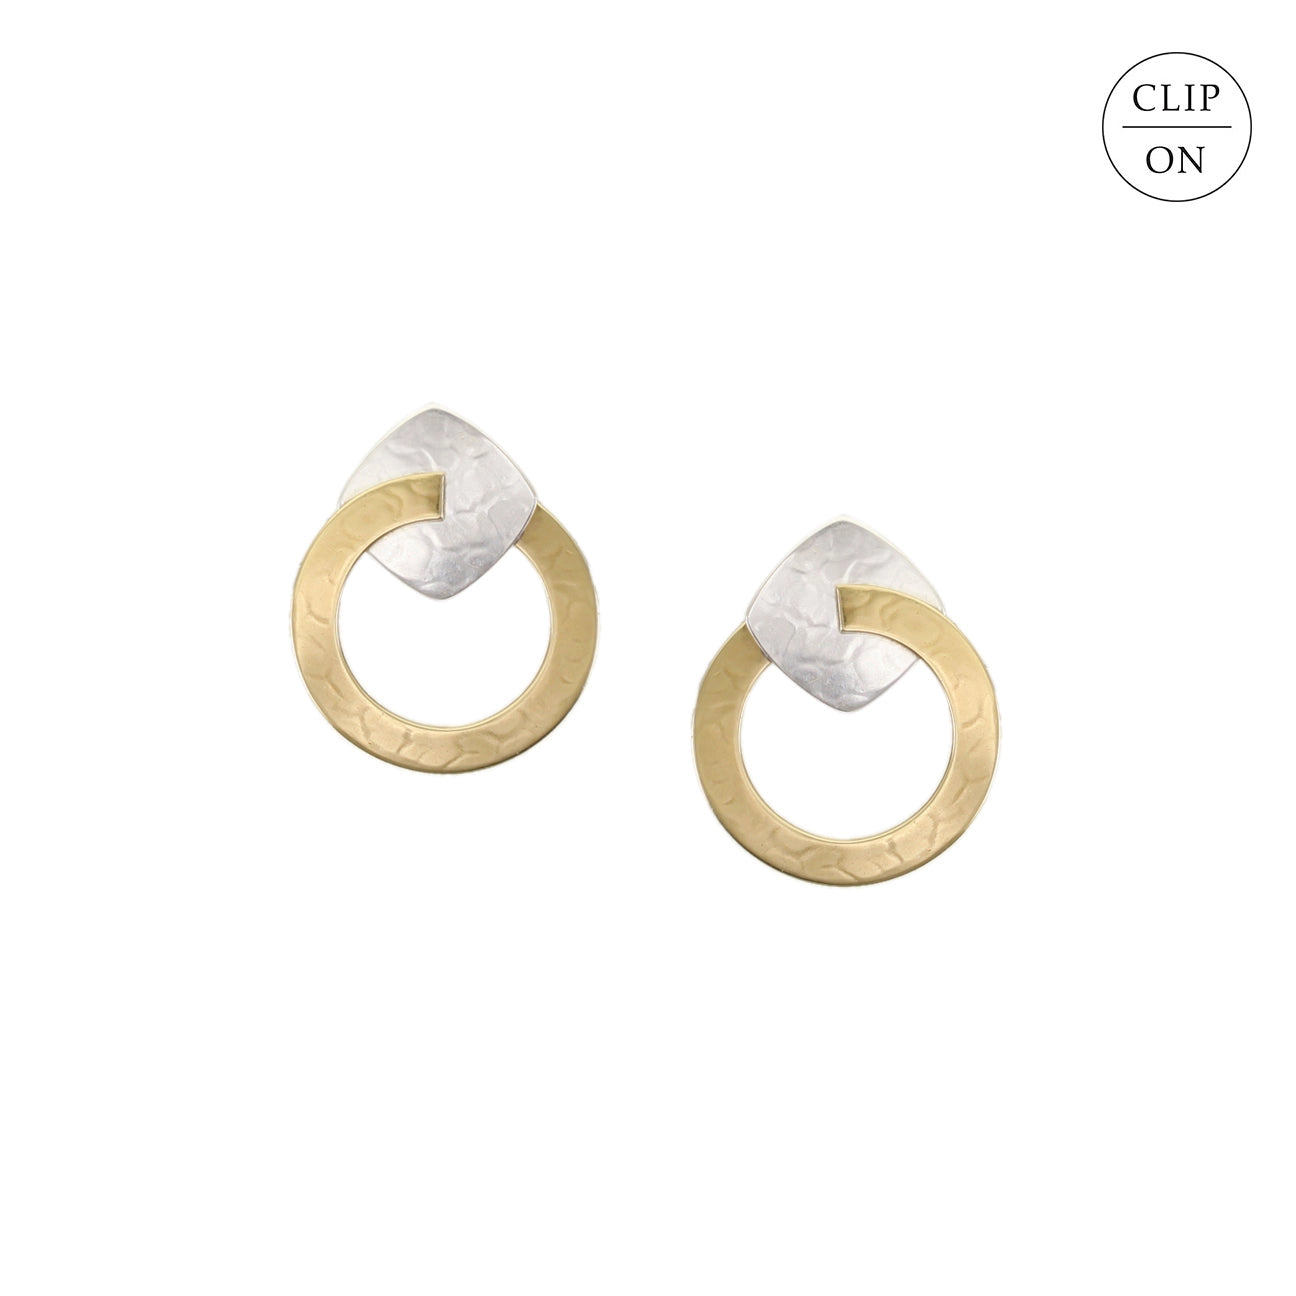 Medium Ring with Rounded Square Clip-On Earrings